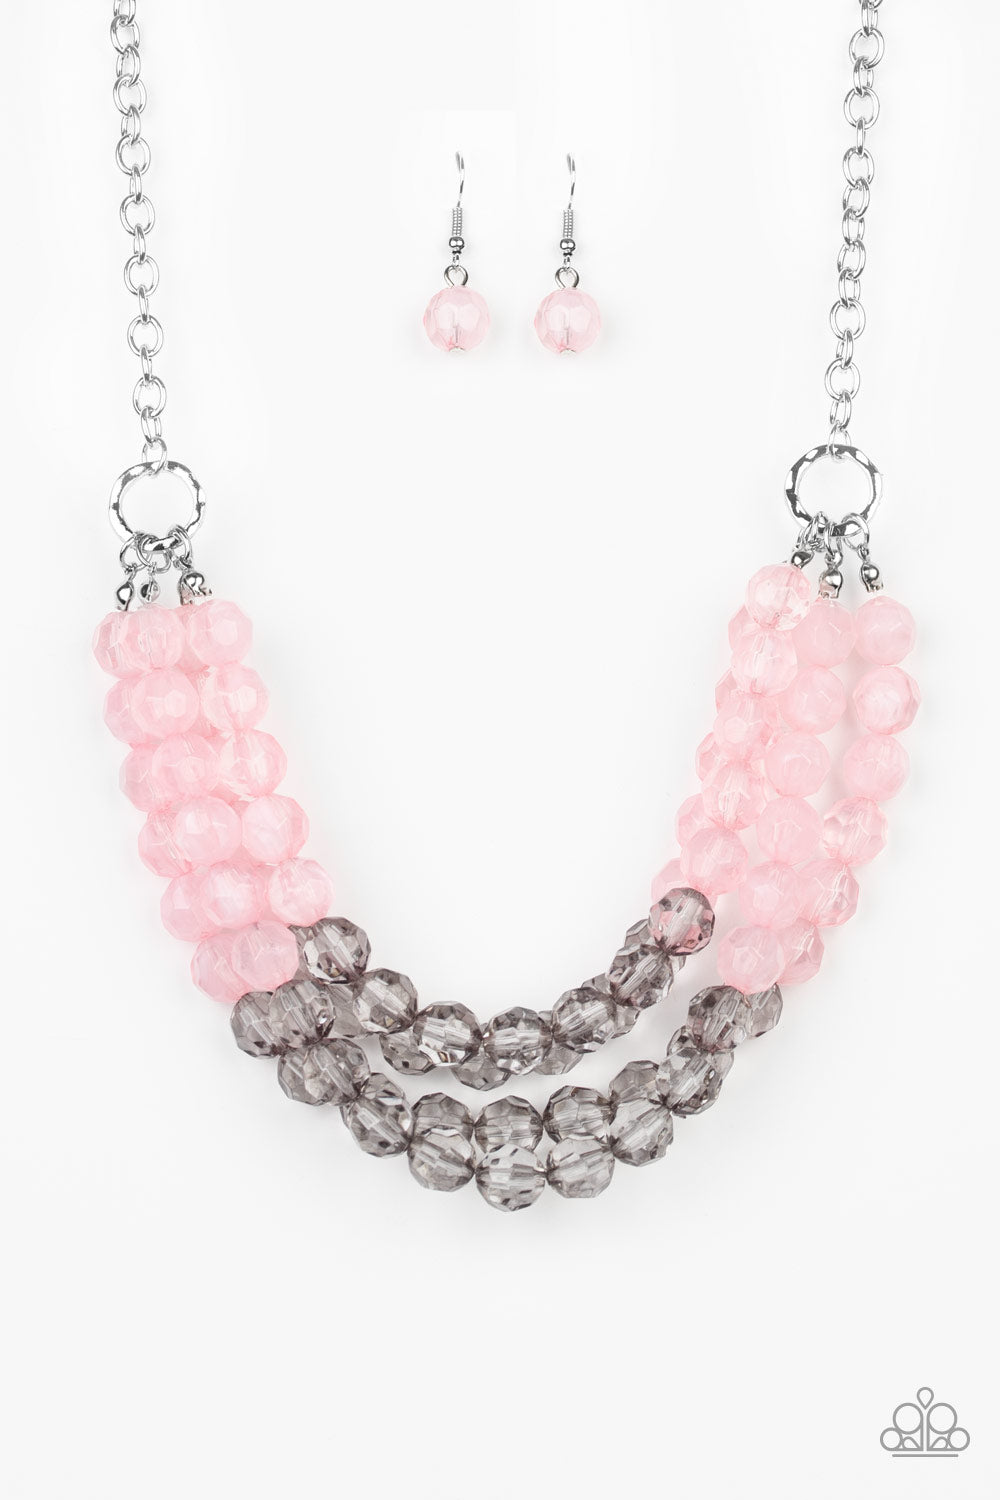 Summer Ice - Pink Necklace